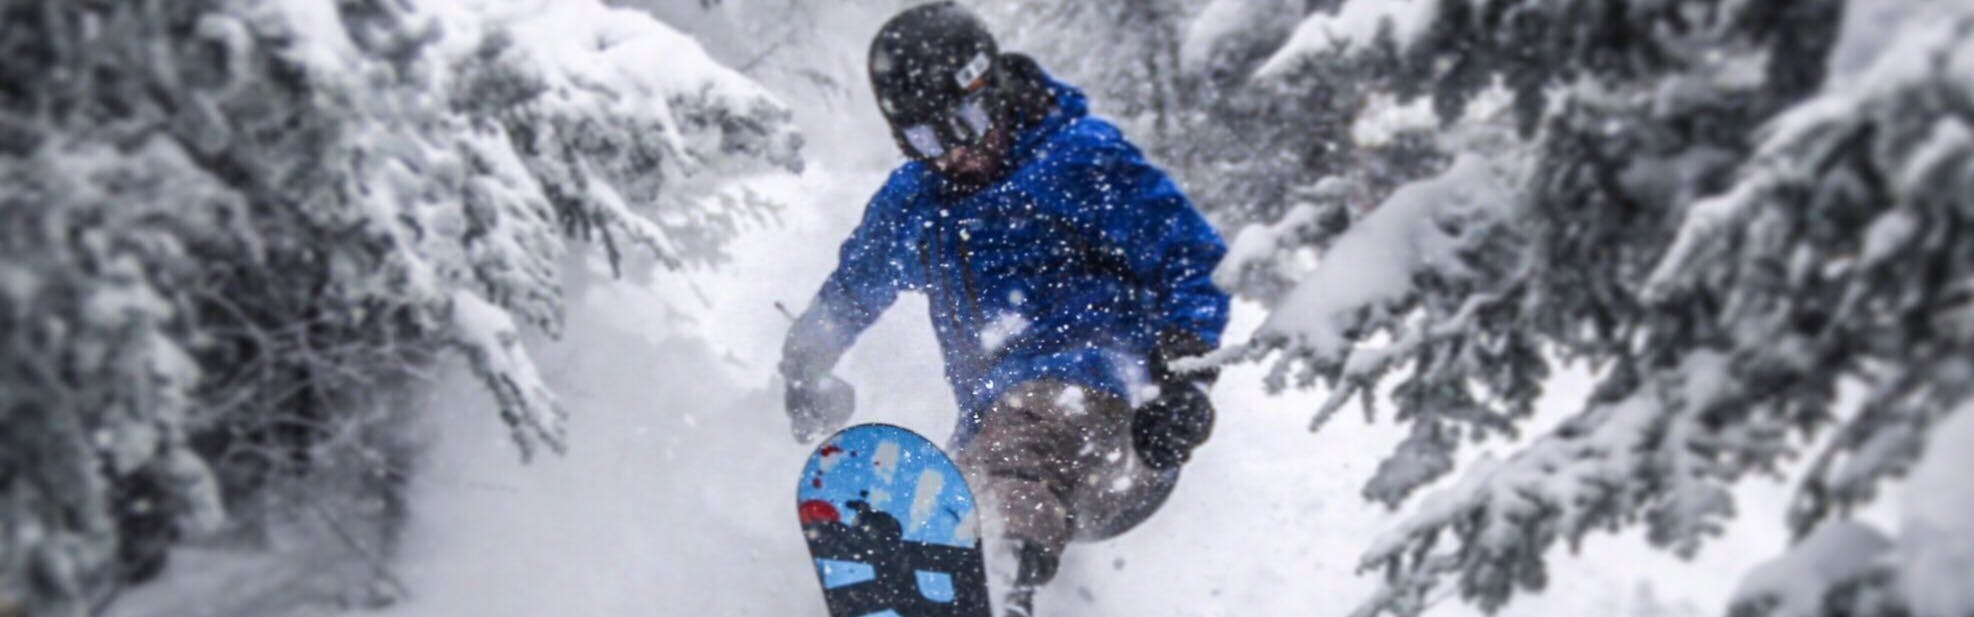 Curated expert Luke Sussdorf launching a jump in powder in the forest